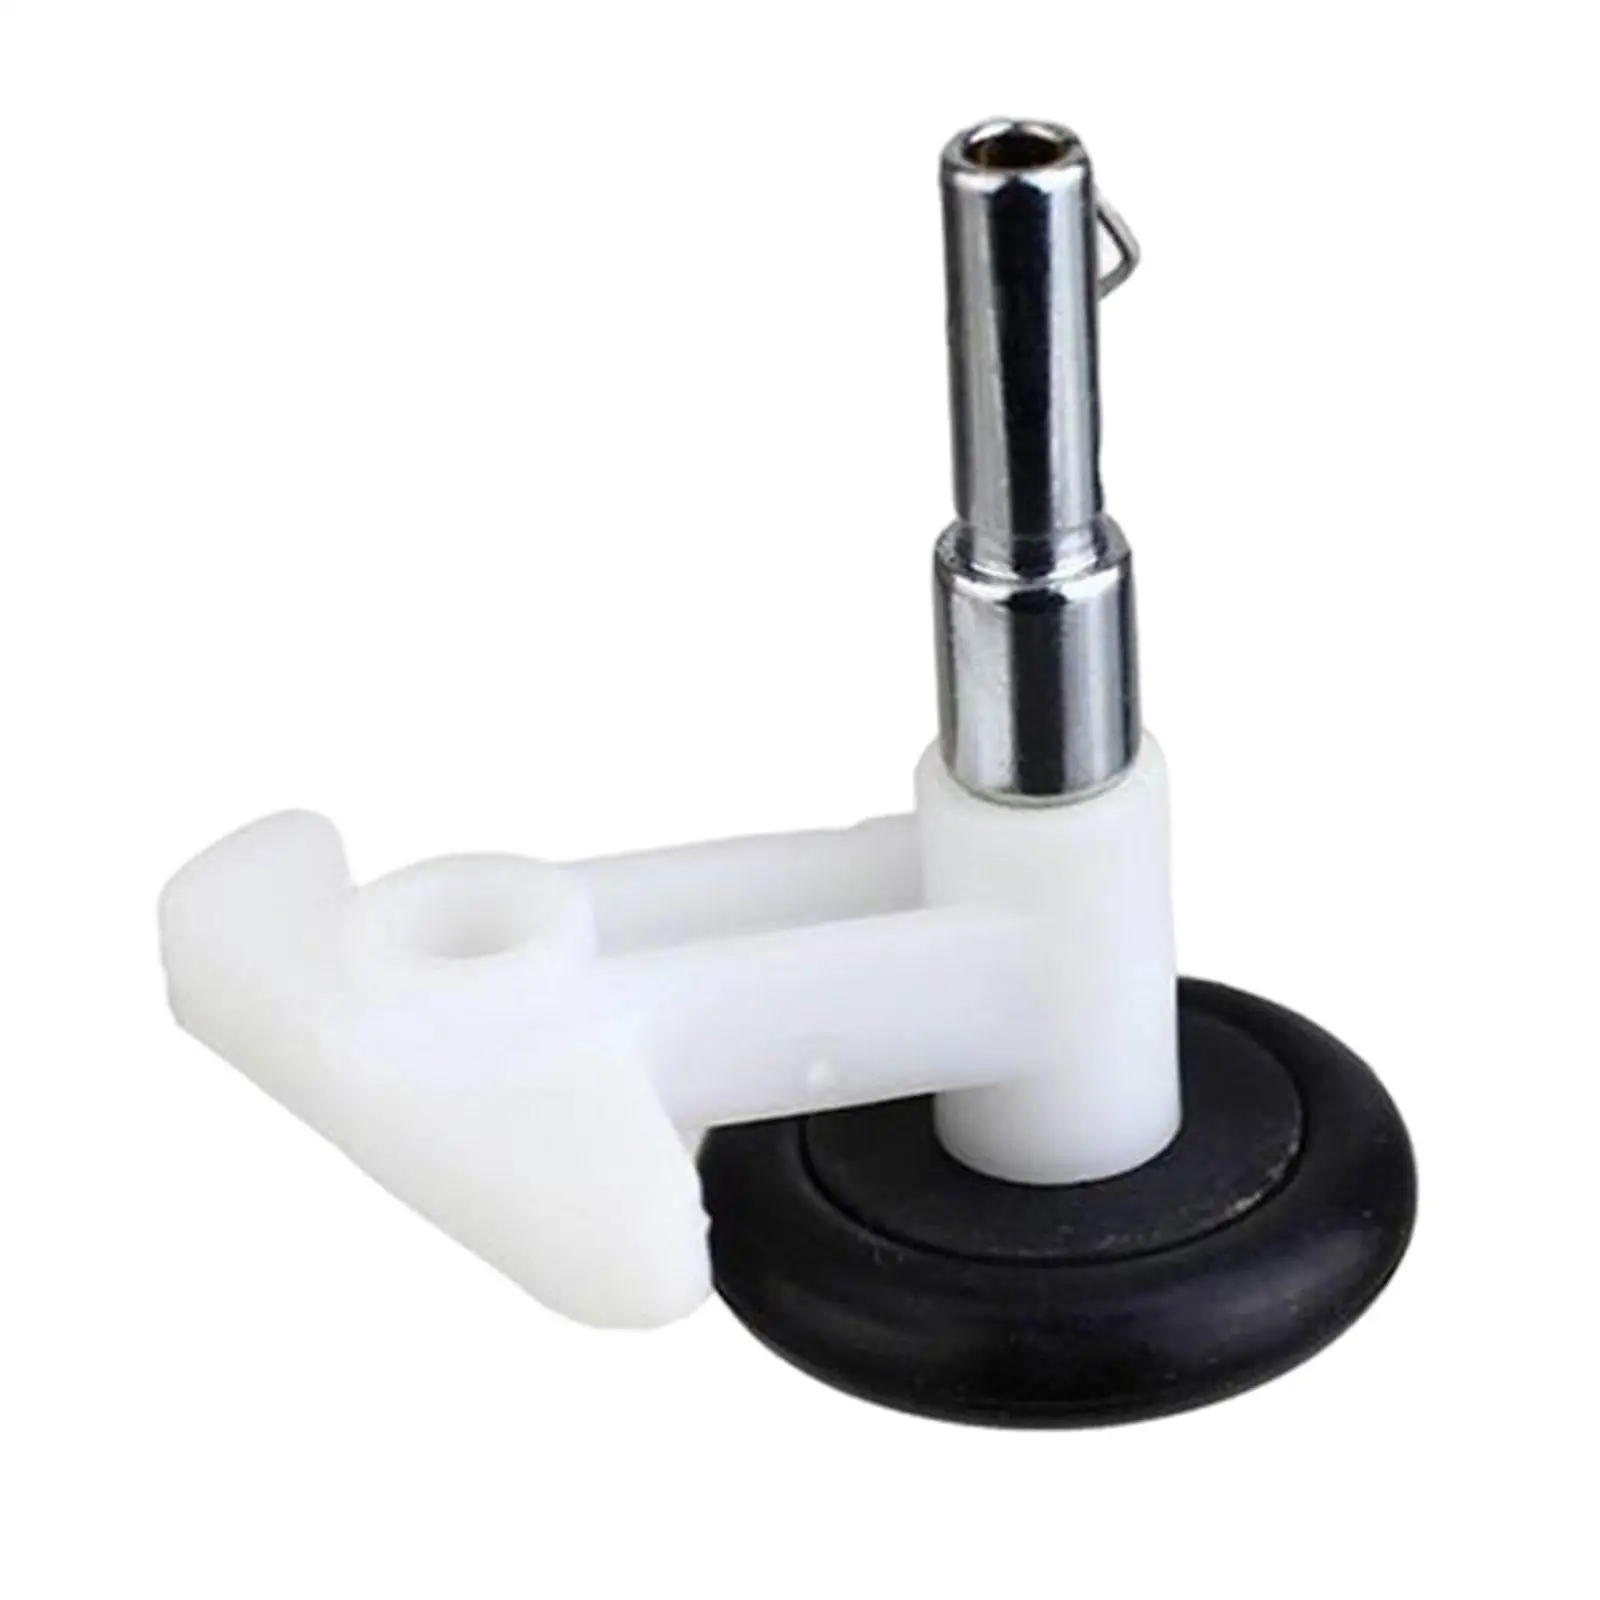 Sewing Machine Bobbin Winder Replace Home Spare Part Portable Multifunctional Gadget Attachment Steel for 1105 for 1507